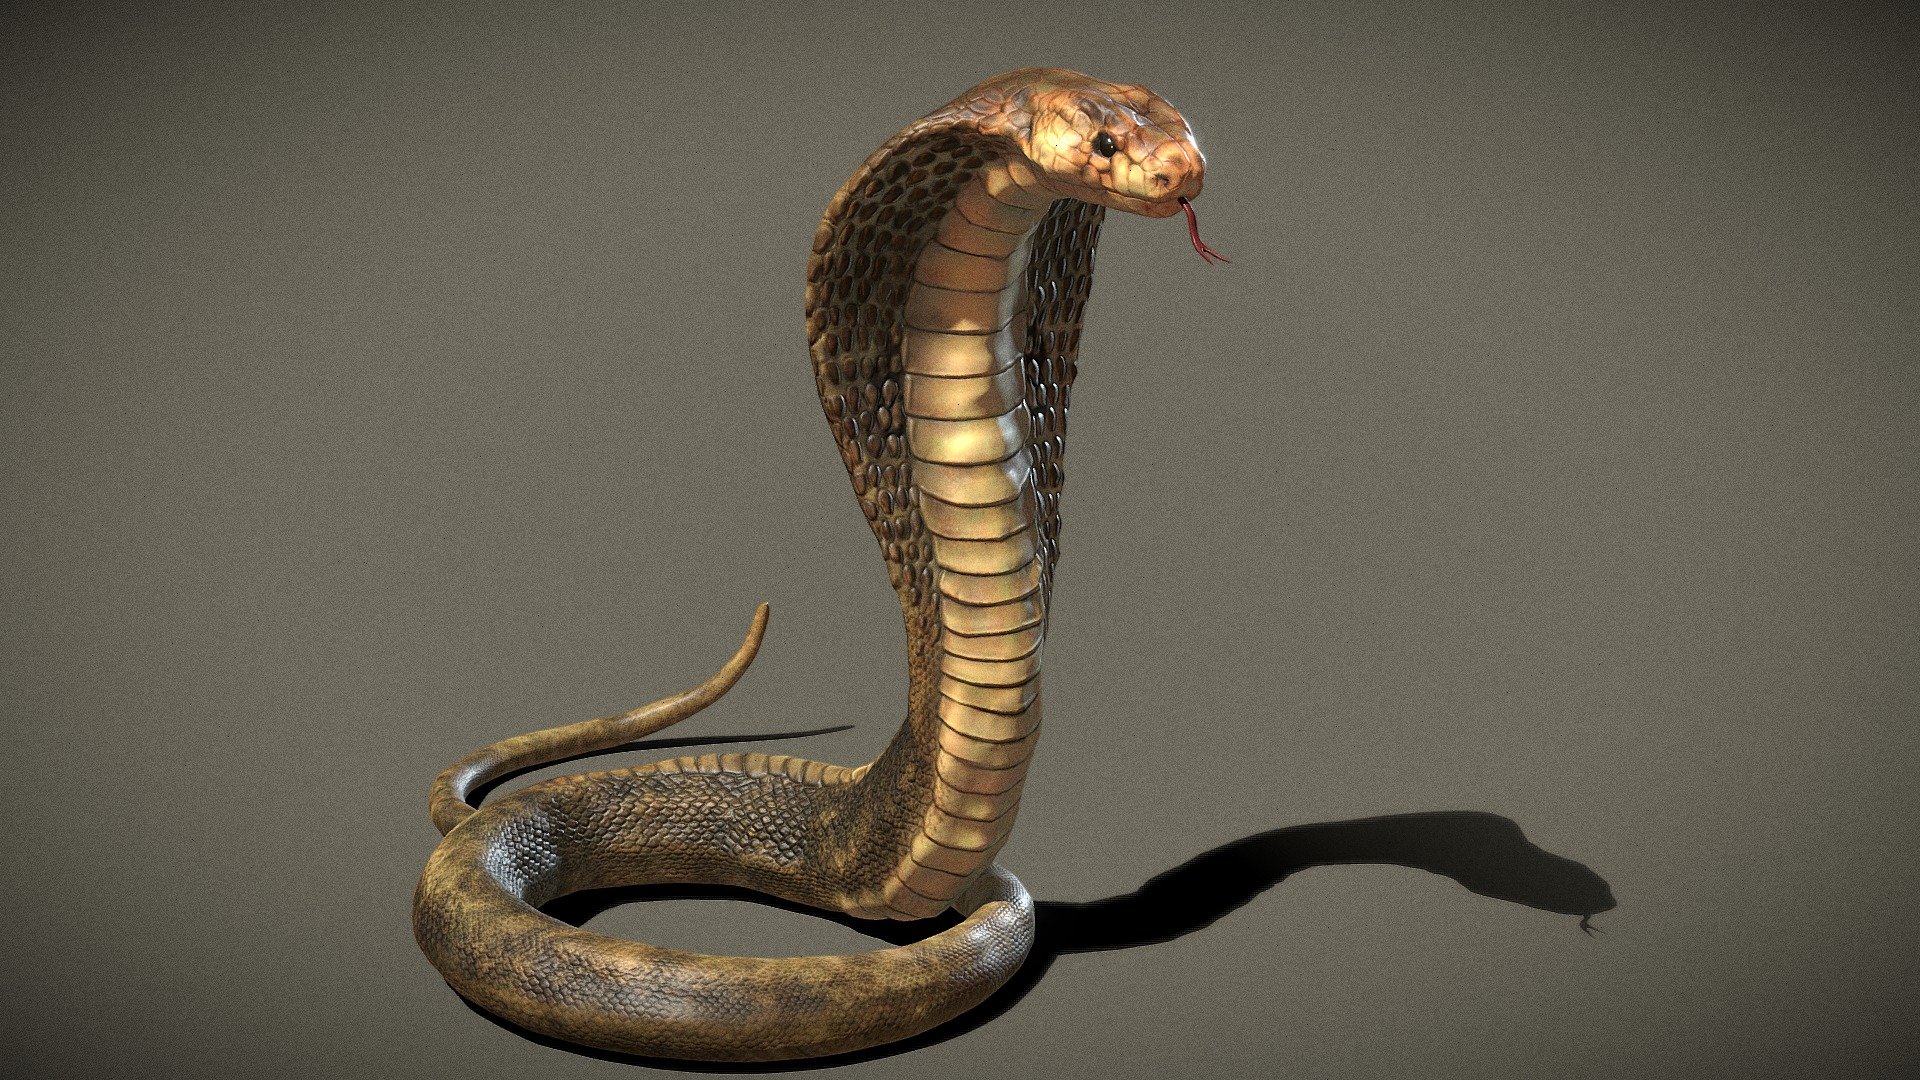 Naja snake sculpted and painted in Zbrush 3d model